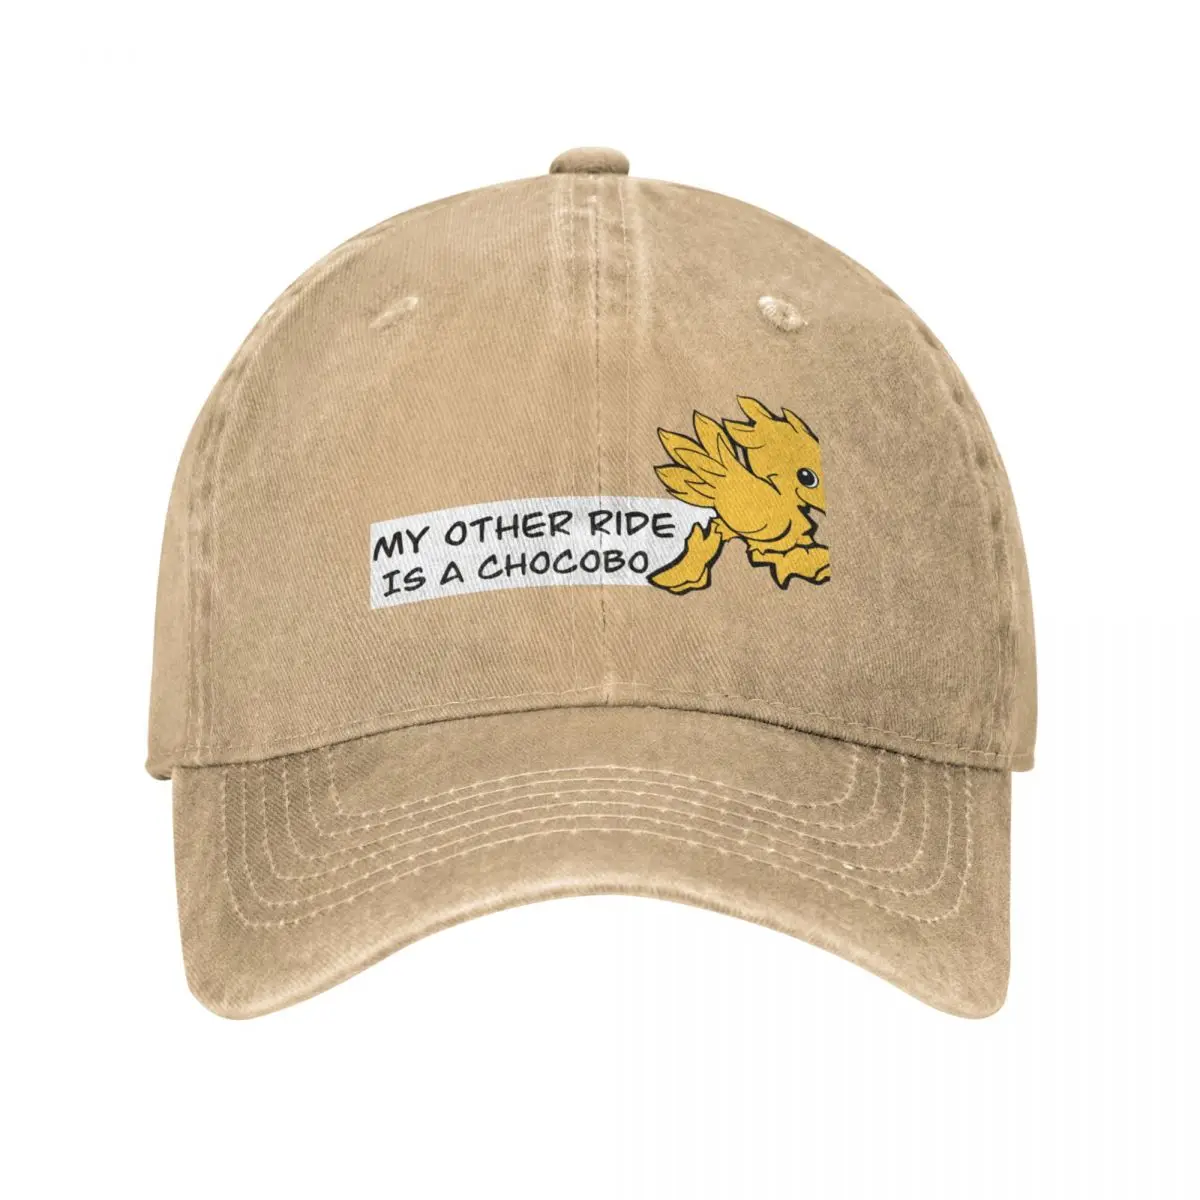 My Other Ride is a Chocobo Cowboy Hat derby hat Luxury Woman Hat Men'S